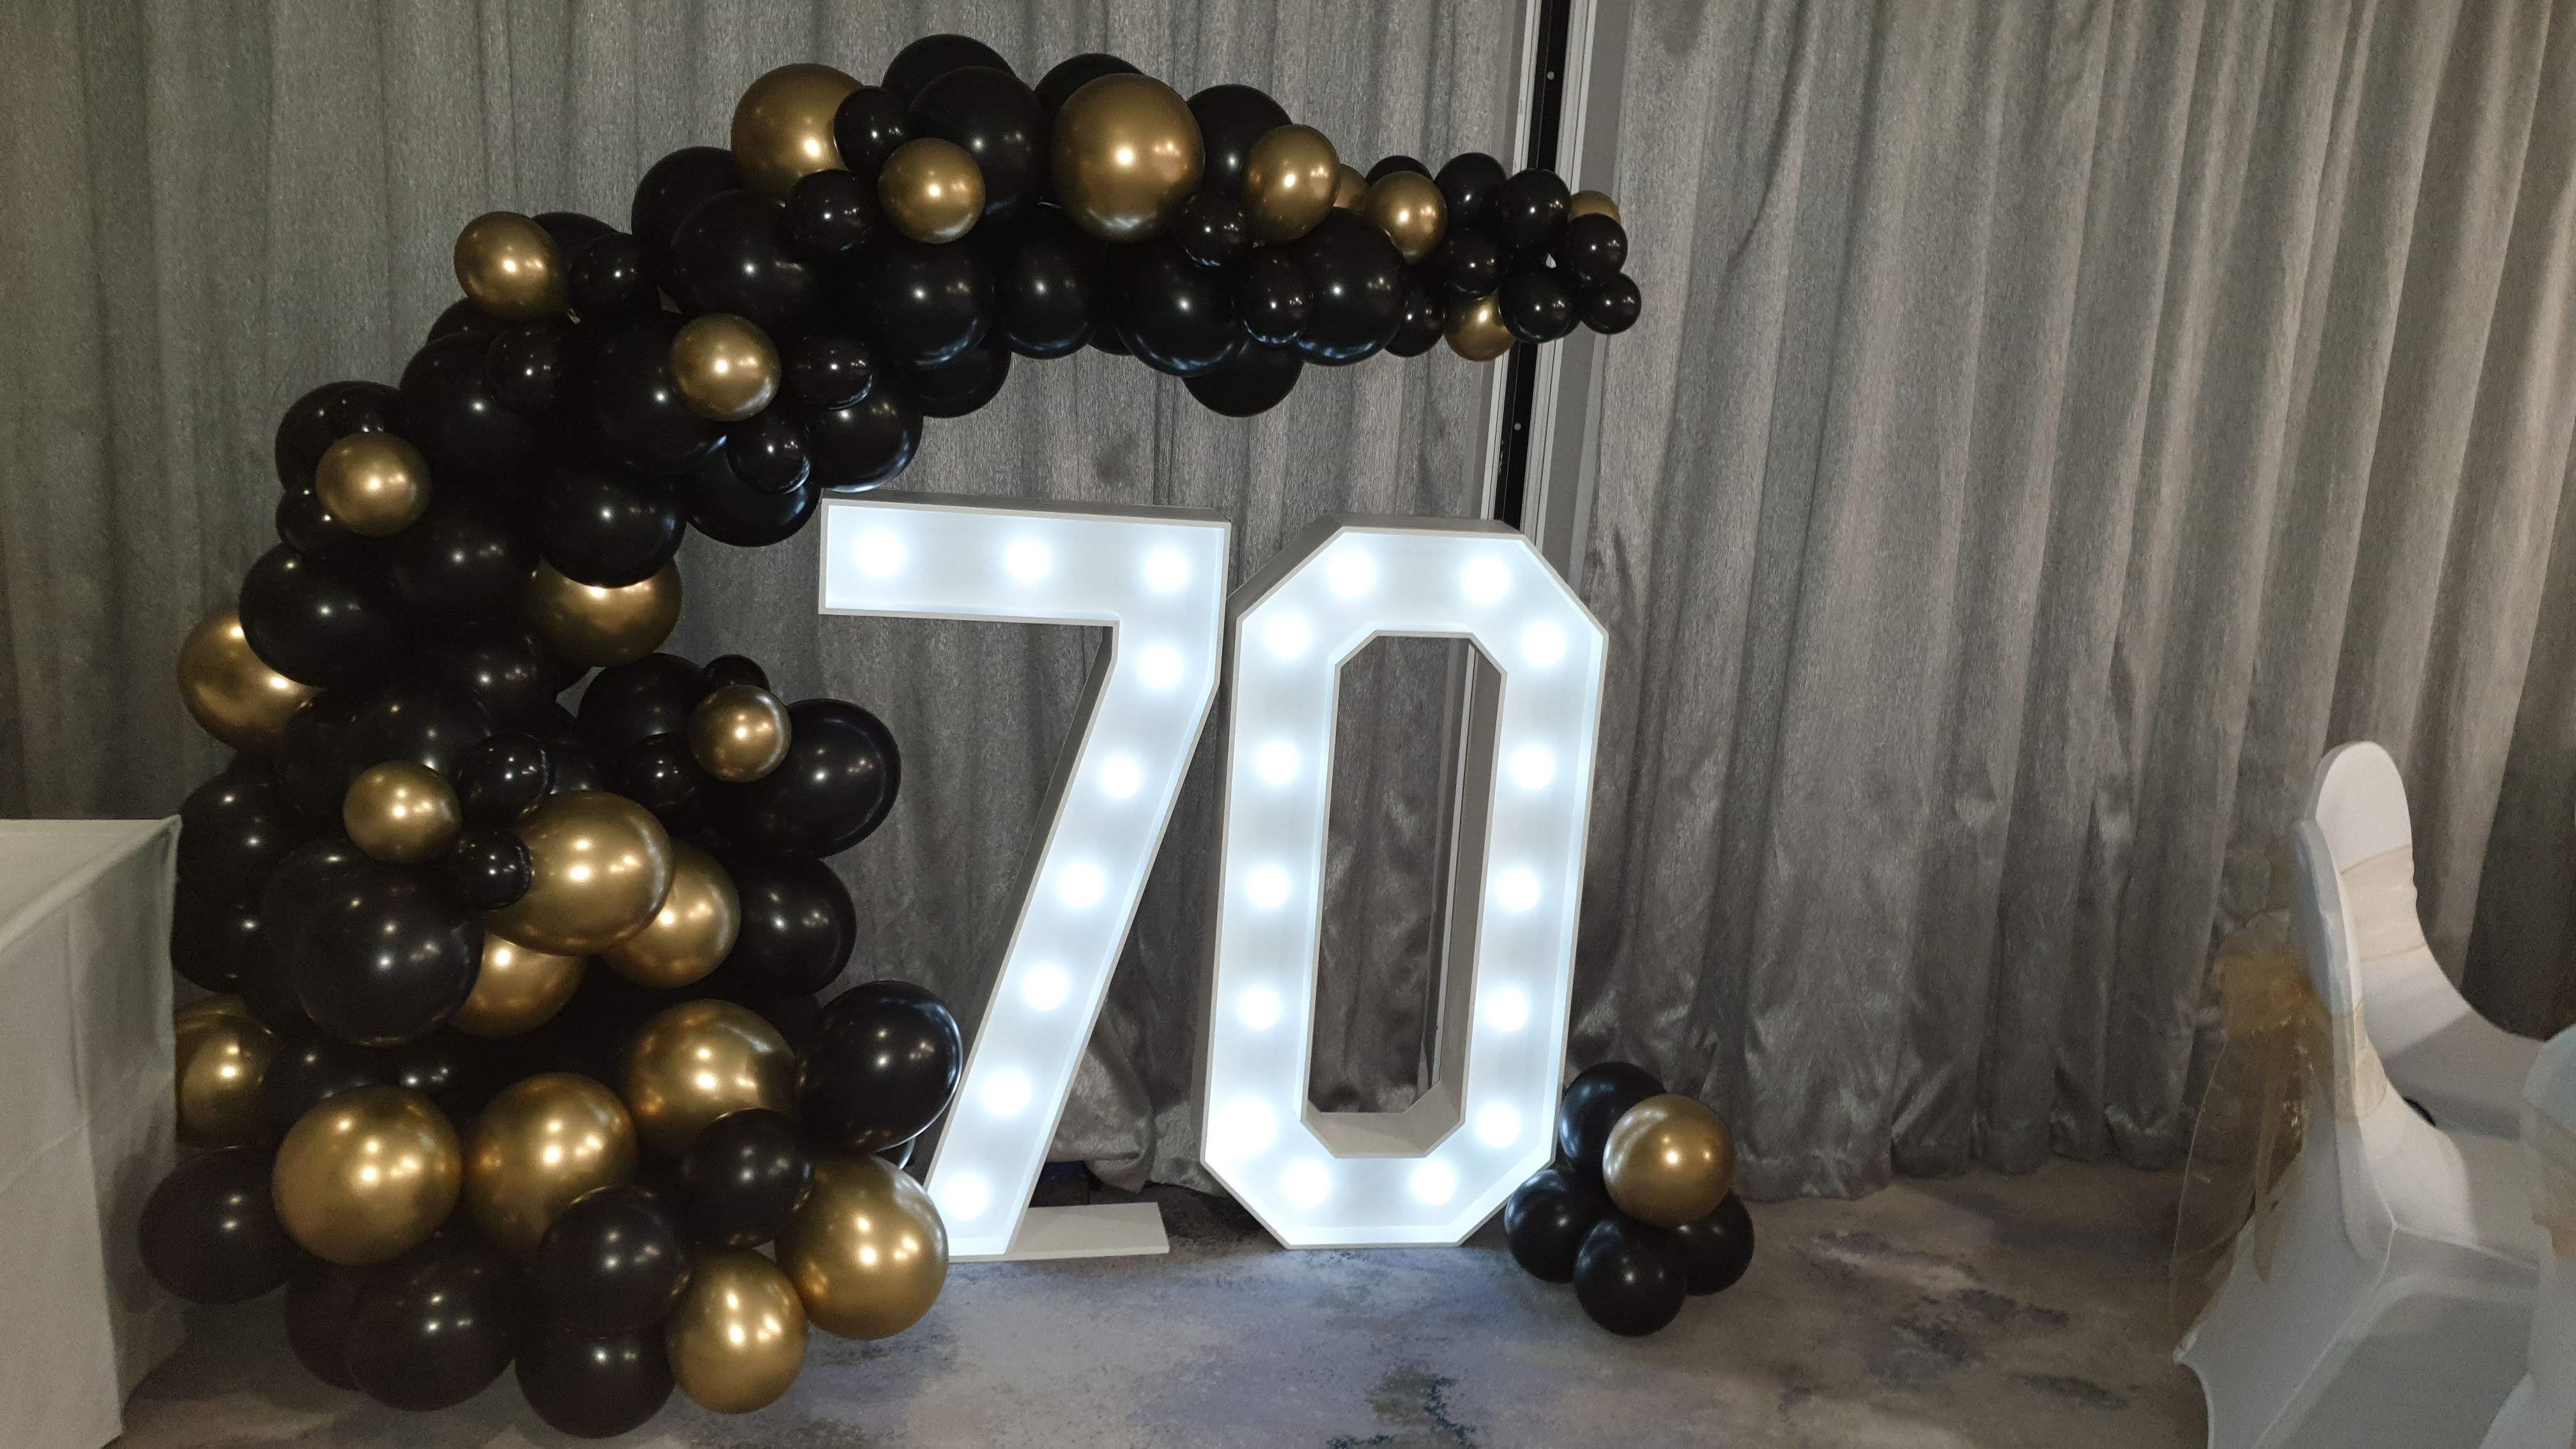 Light_Up_Numbers_70_006